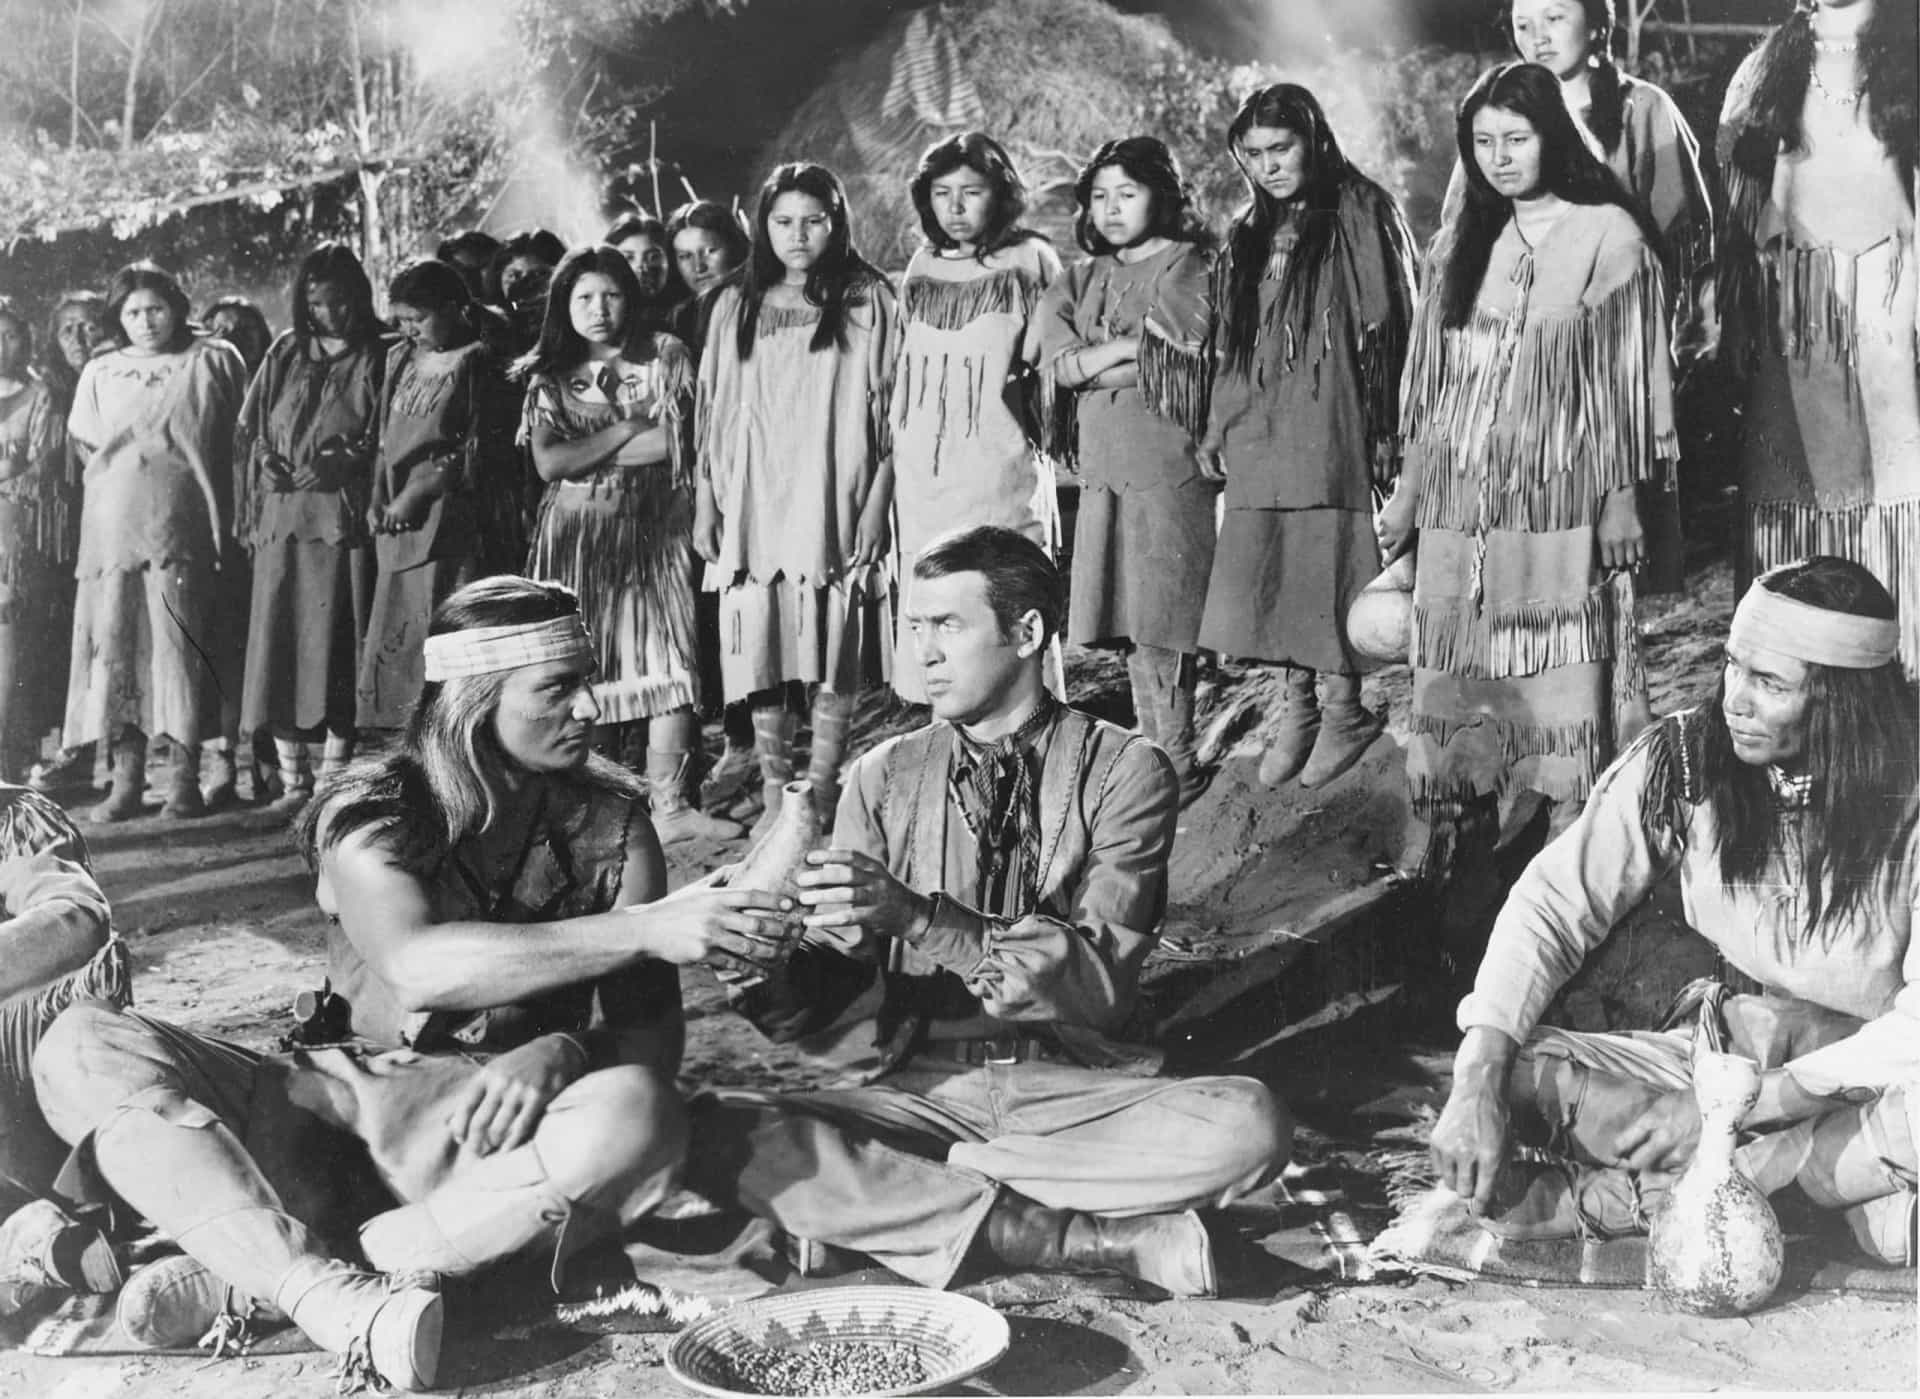 <p>This Western, directed by Delmer Daves, was one of the first movies to portray Native Americans in a positive light after World War II.</p><p><a href="https://www.msn.com/en-us/community/channel/vid-7xx8mnucu55yw63we9va2gwr7uihbxwc68fxqp25x6tg4ftibpra?cvid=94631541bc0f4f89bfd59158d696ad7e">Follow us and access great exclusive content everyday</a></p>